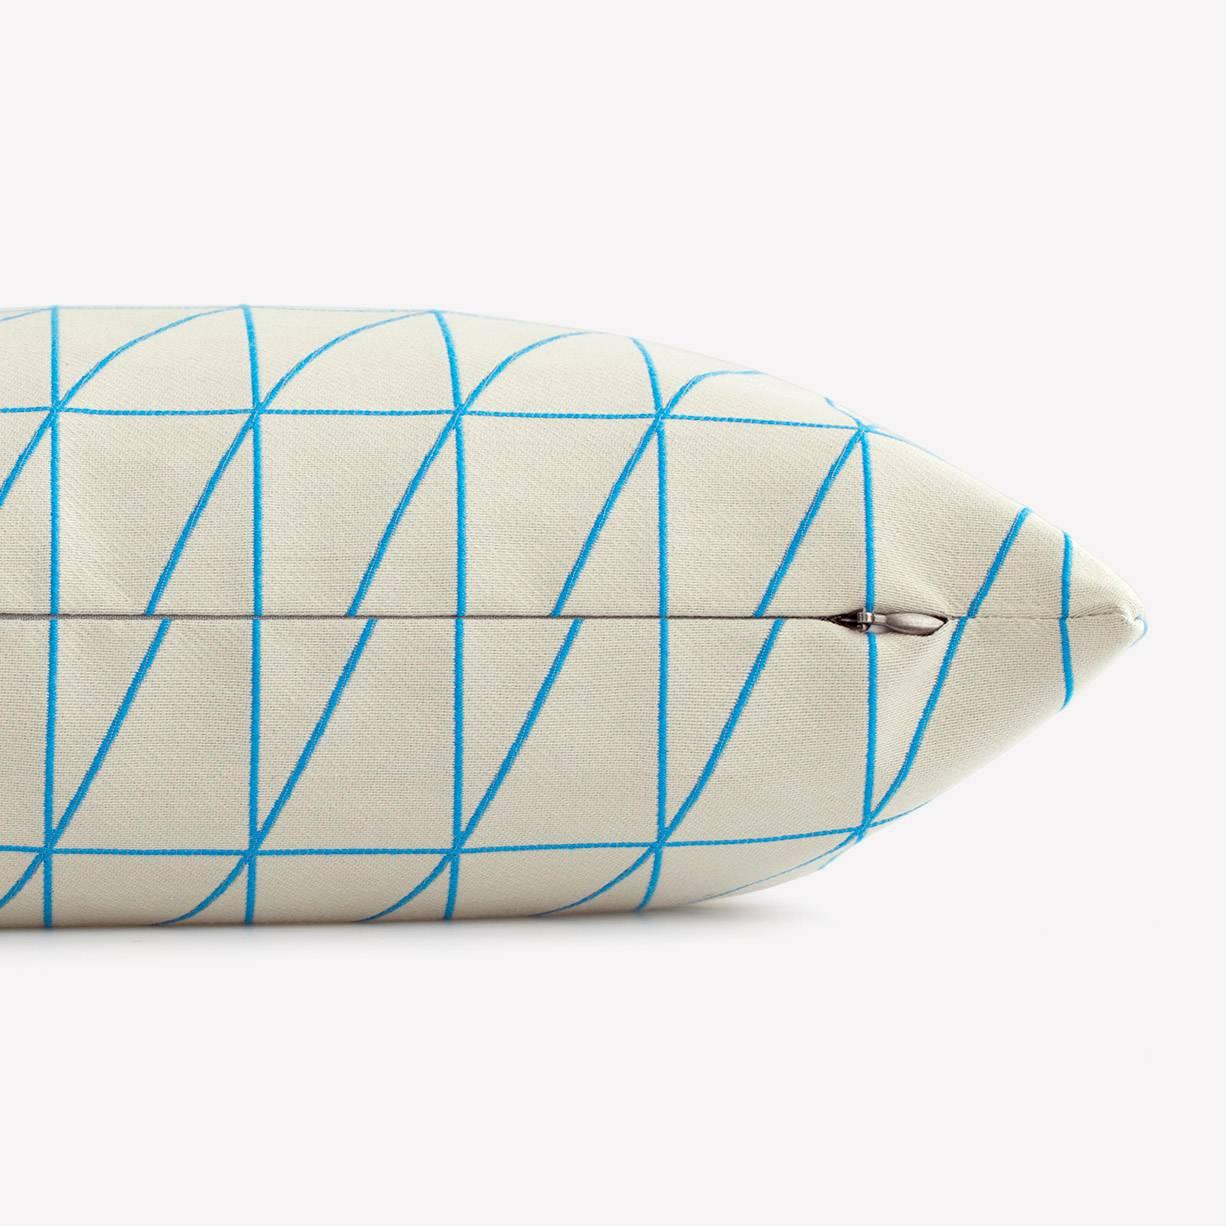 Maharam Pillow
Bright Angle by Scholten & Baijings 
002 Cyan

Bright grid, bright angle, and bright cube are second in a series of products designed by Scholten & Baijings in collaboration with Maharam. Drawing upon Scholten & Baijings' distinct